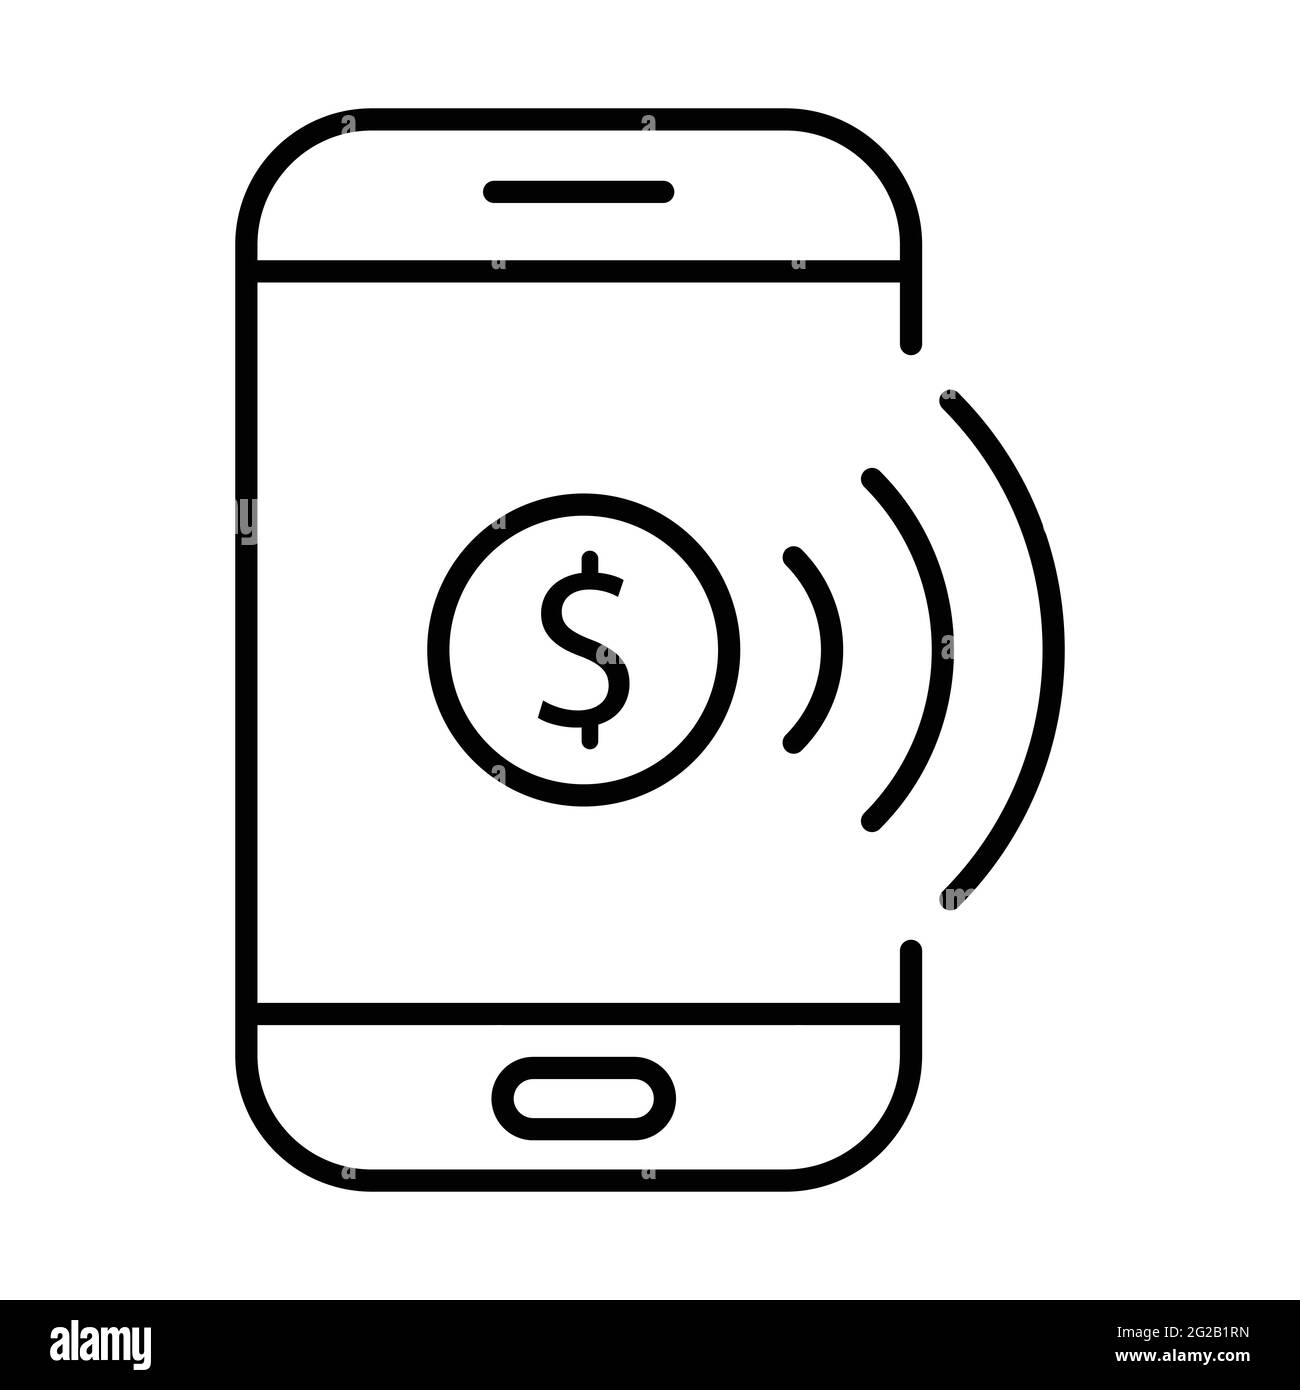 Mobile payment icon vector for your web site design, logo, app, UI. illustration Stock Vector